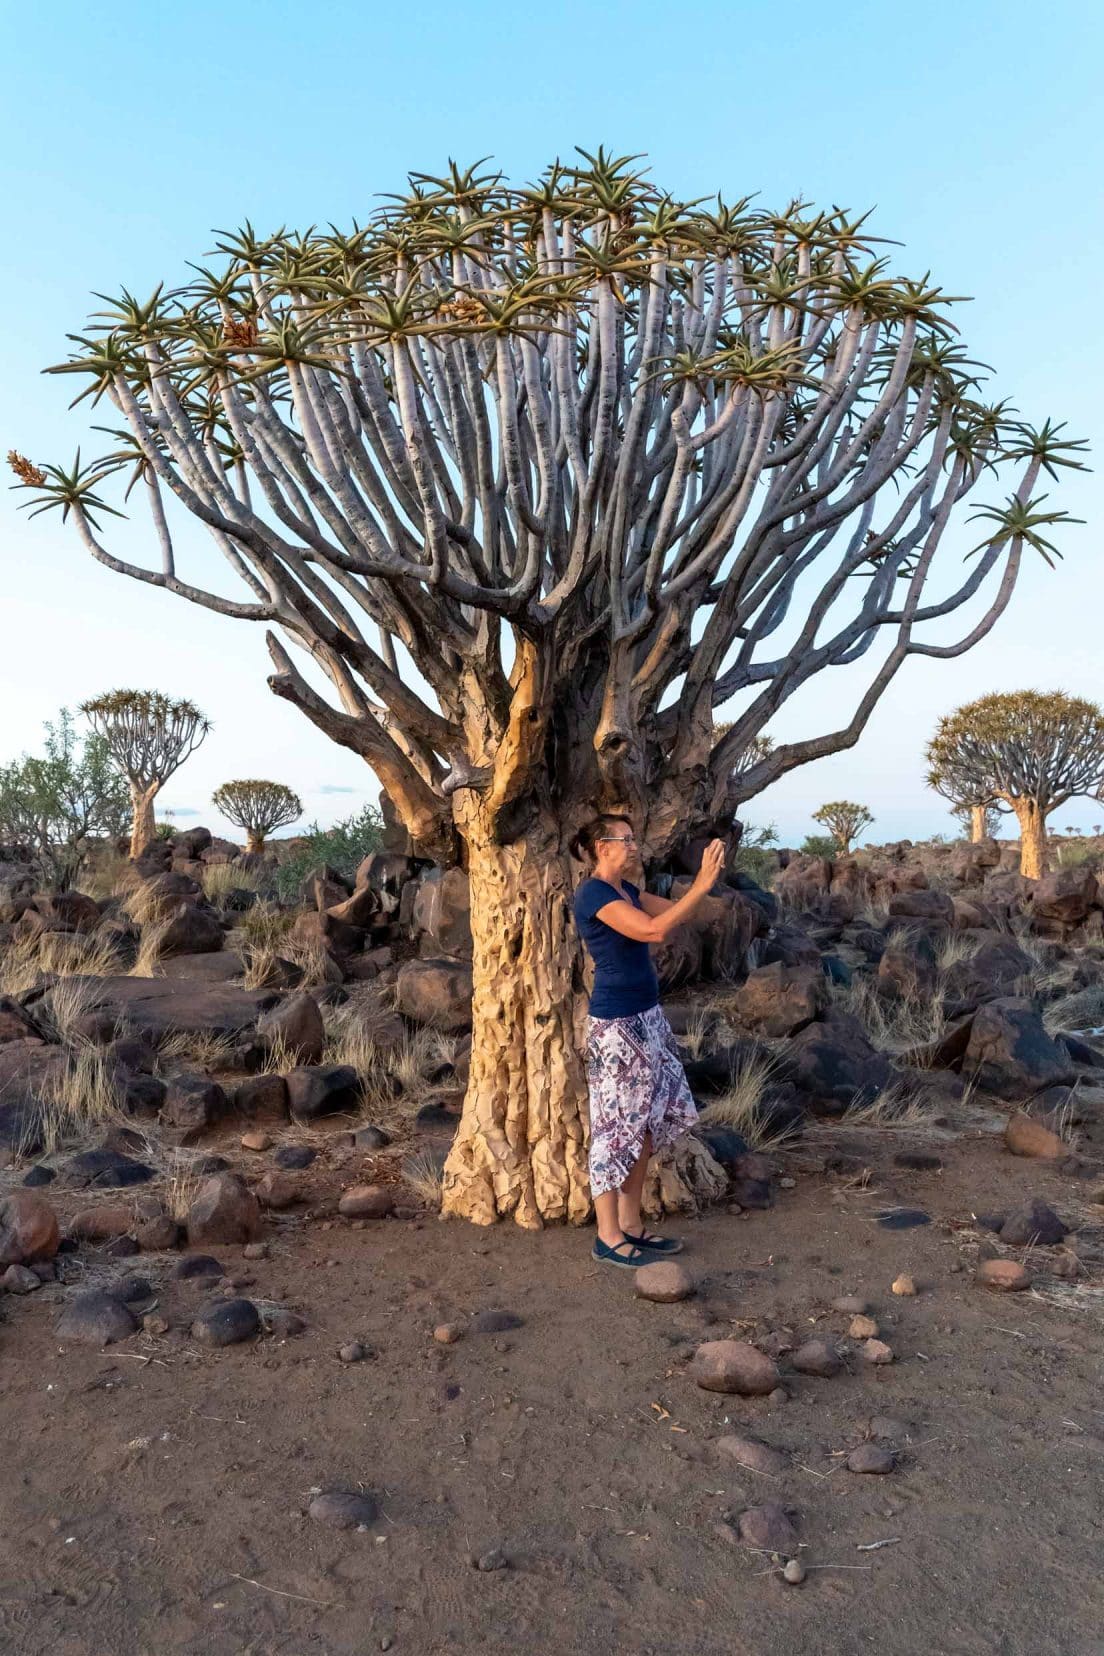 Shelley taking photos at the Quiver tree forest namibia